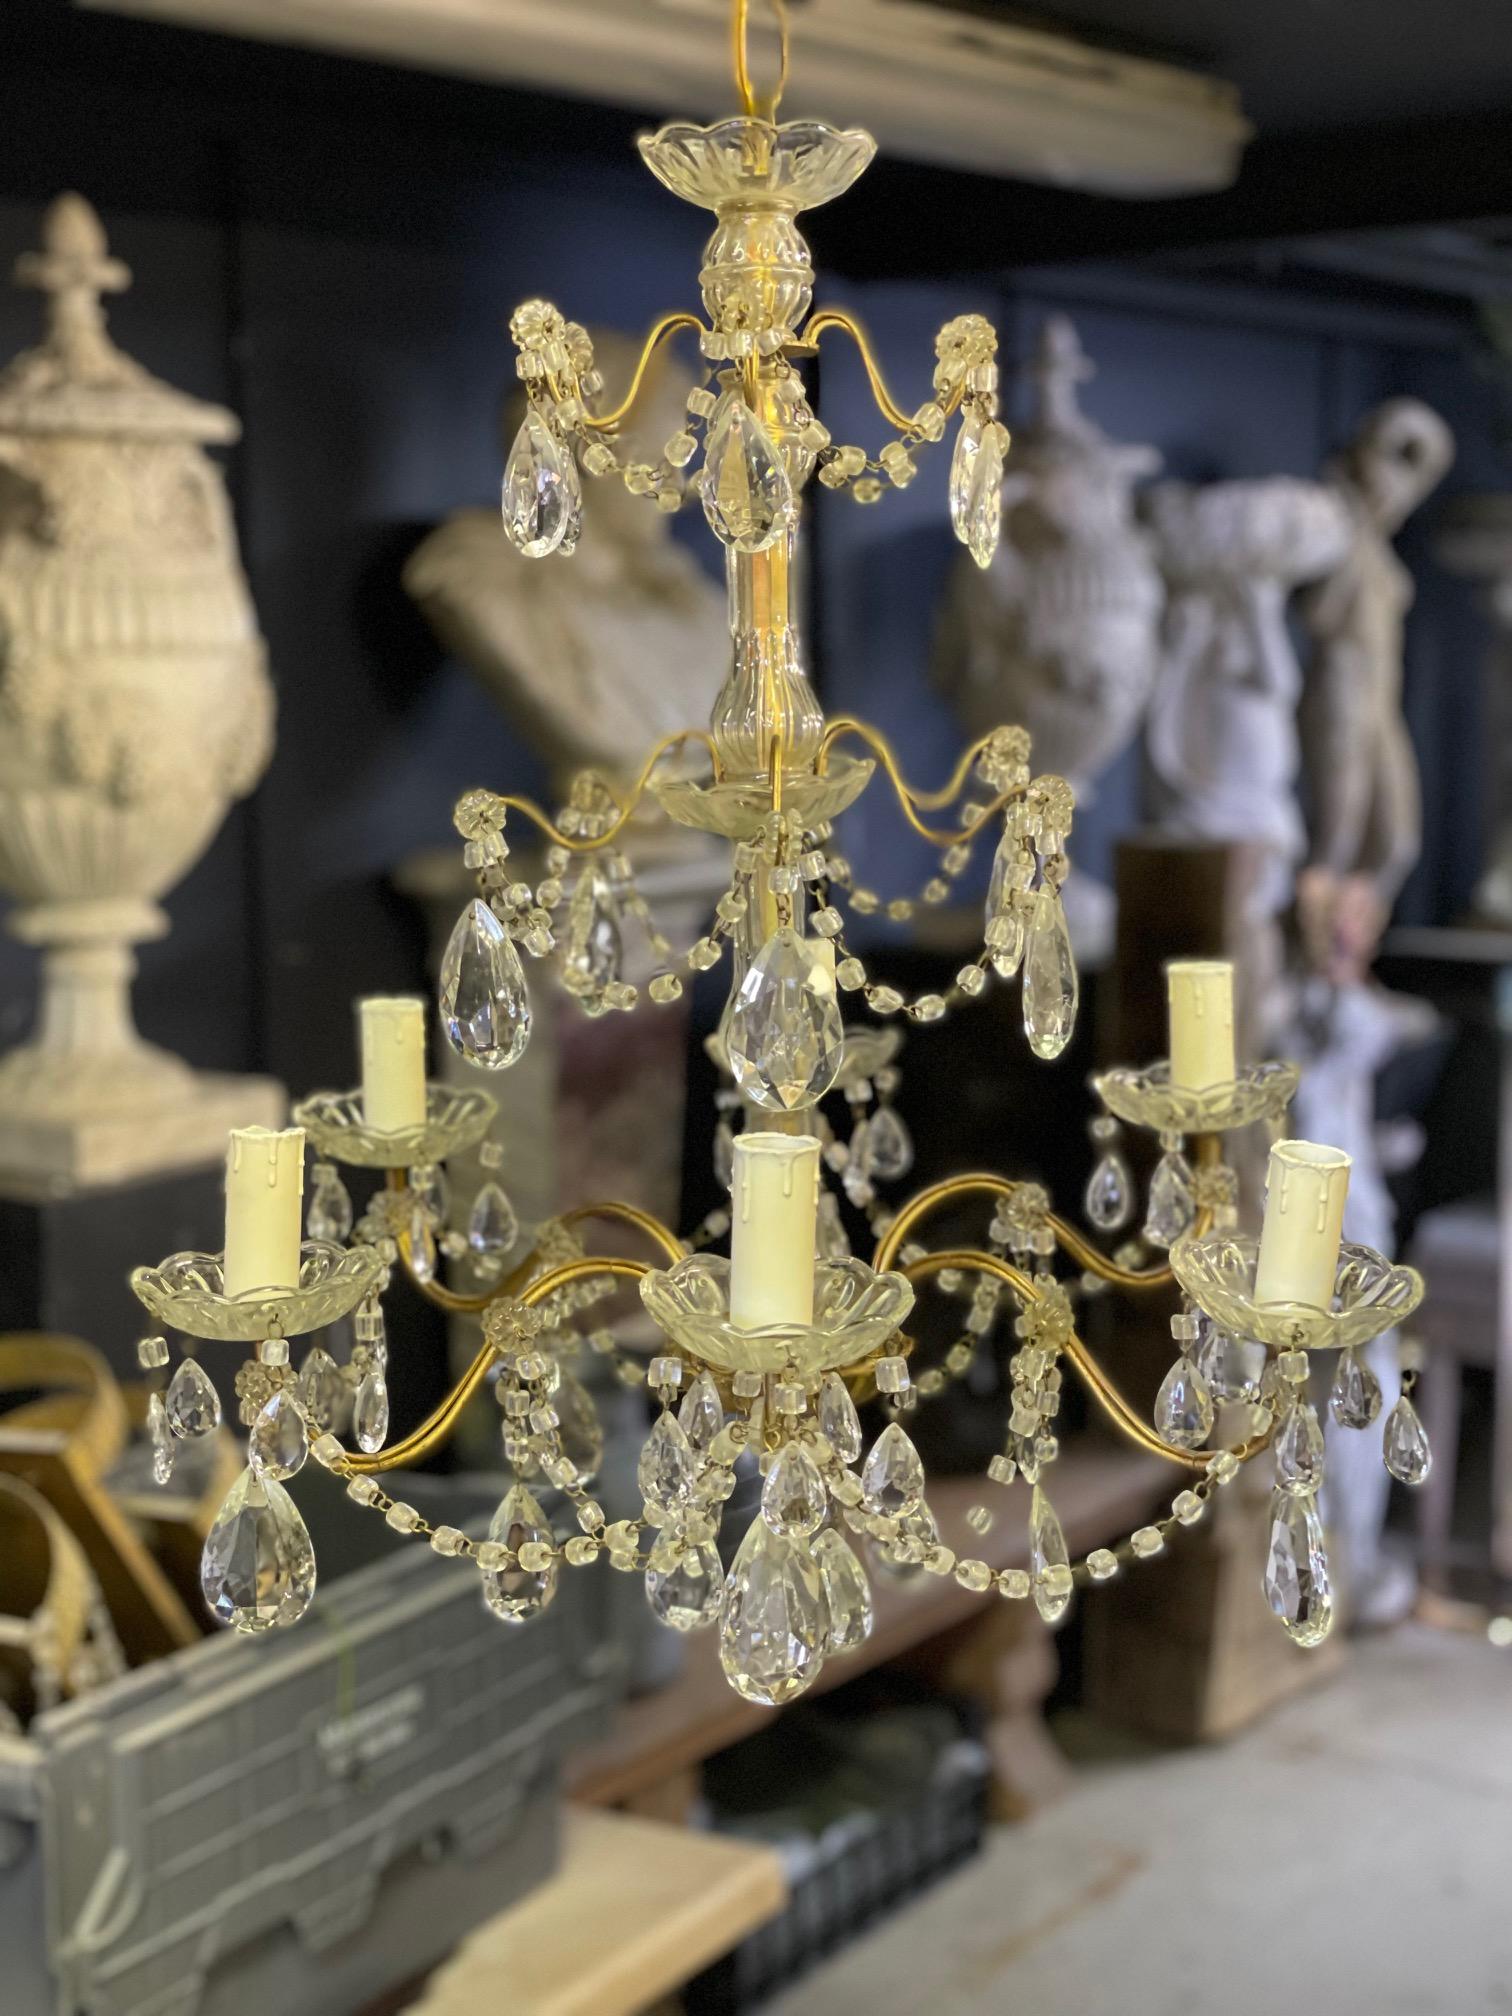 A very elegent mid-20th century glass and gold framed Italian chandelier holding x6 arms.

Height includeds chain and ceiling rose so can be altered.

Removed from a private estate in Chigwell Essex, United Kingdon.